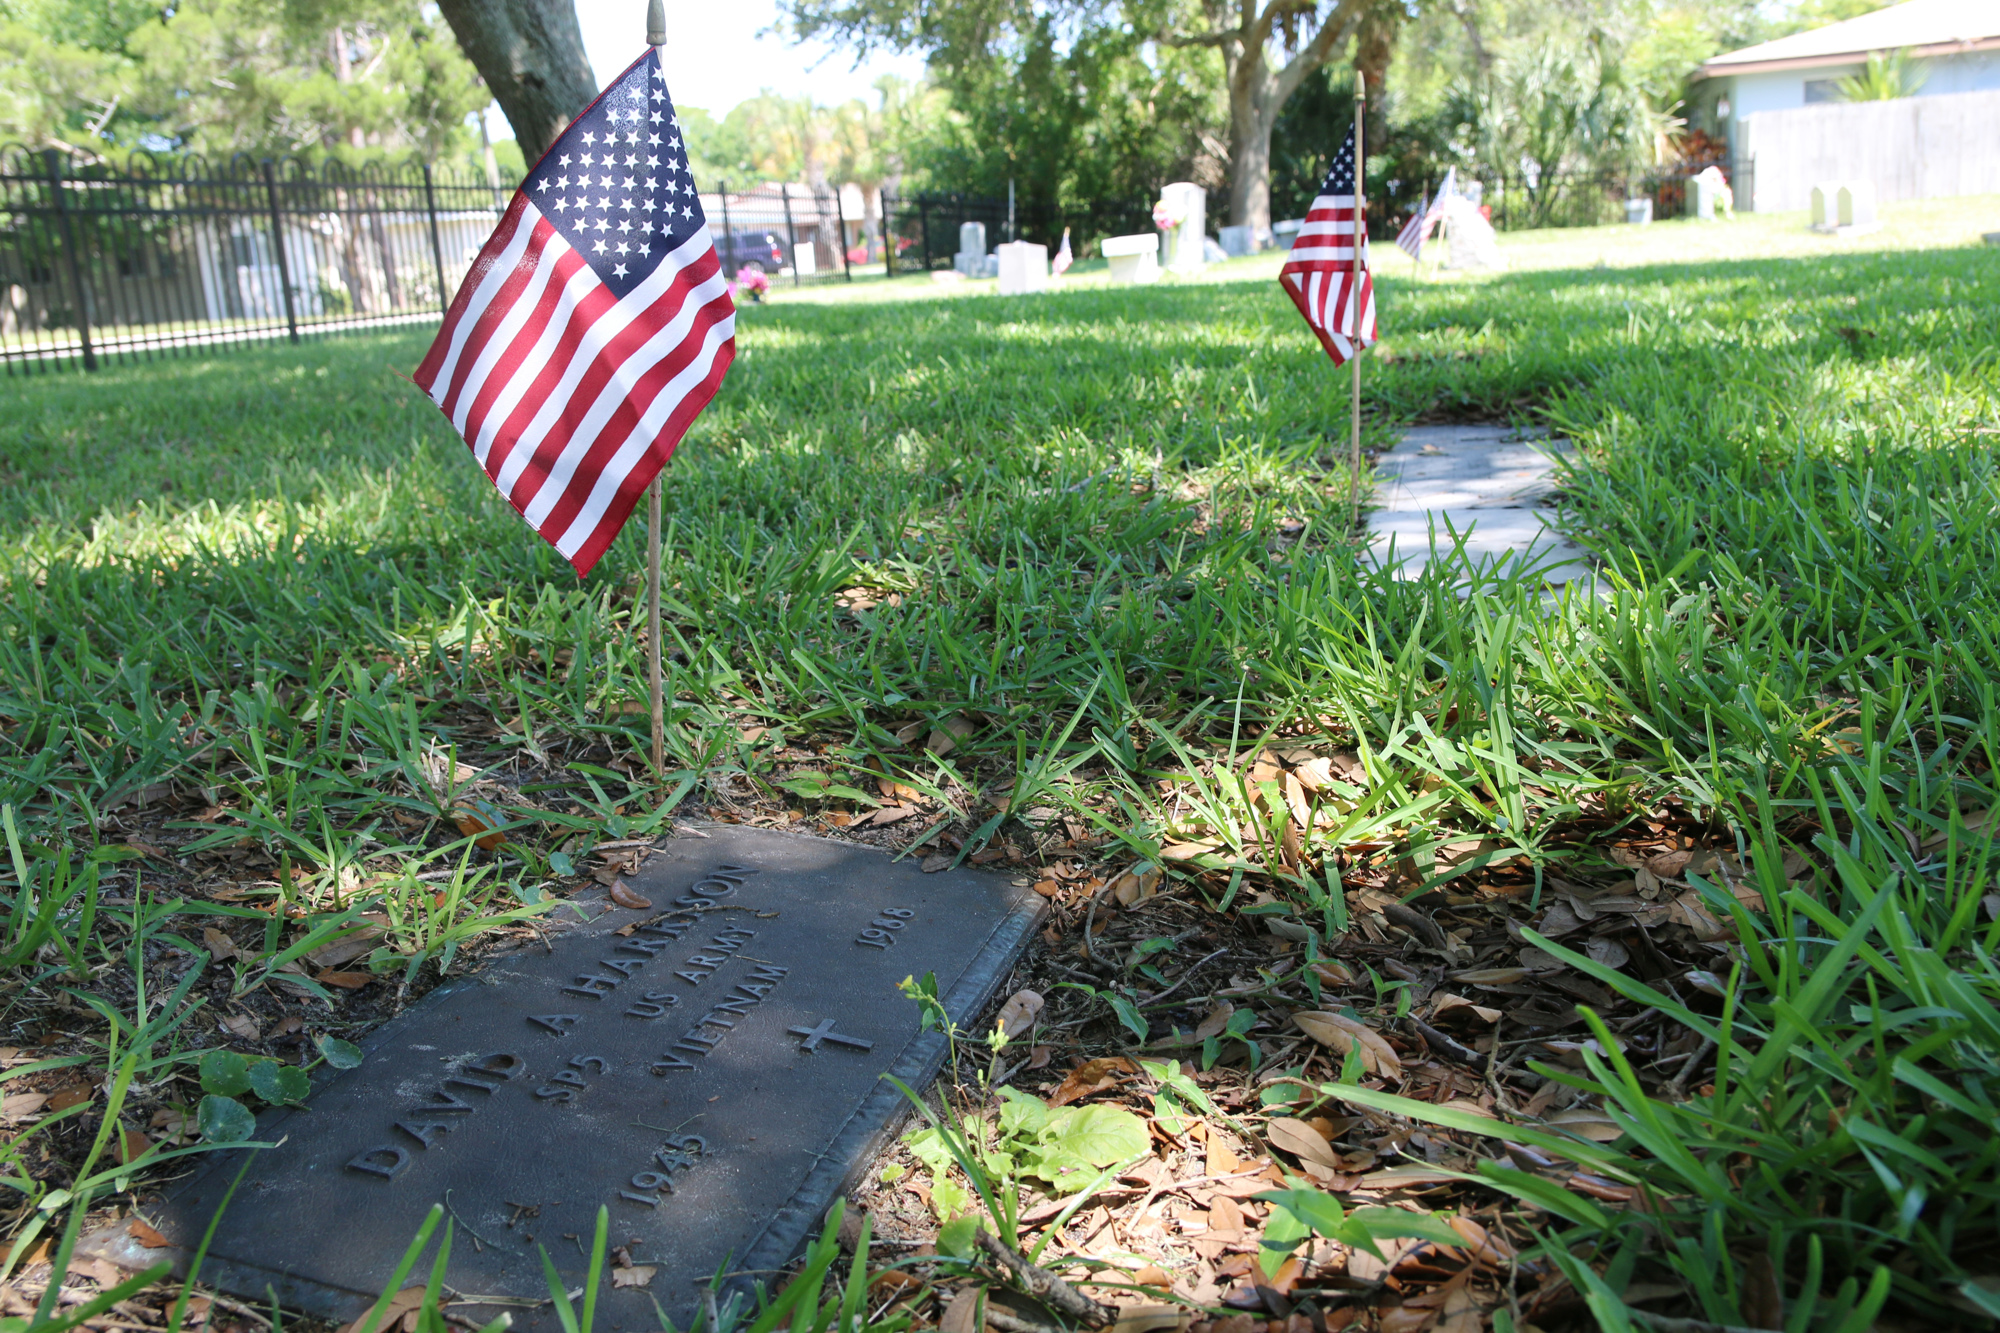 Flags wave in the air by the graves of veterans at Hillside Cemetery. Photo by Jarleene Almenas